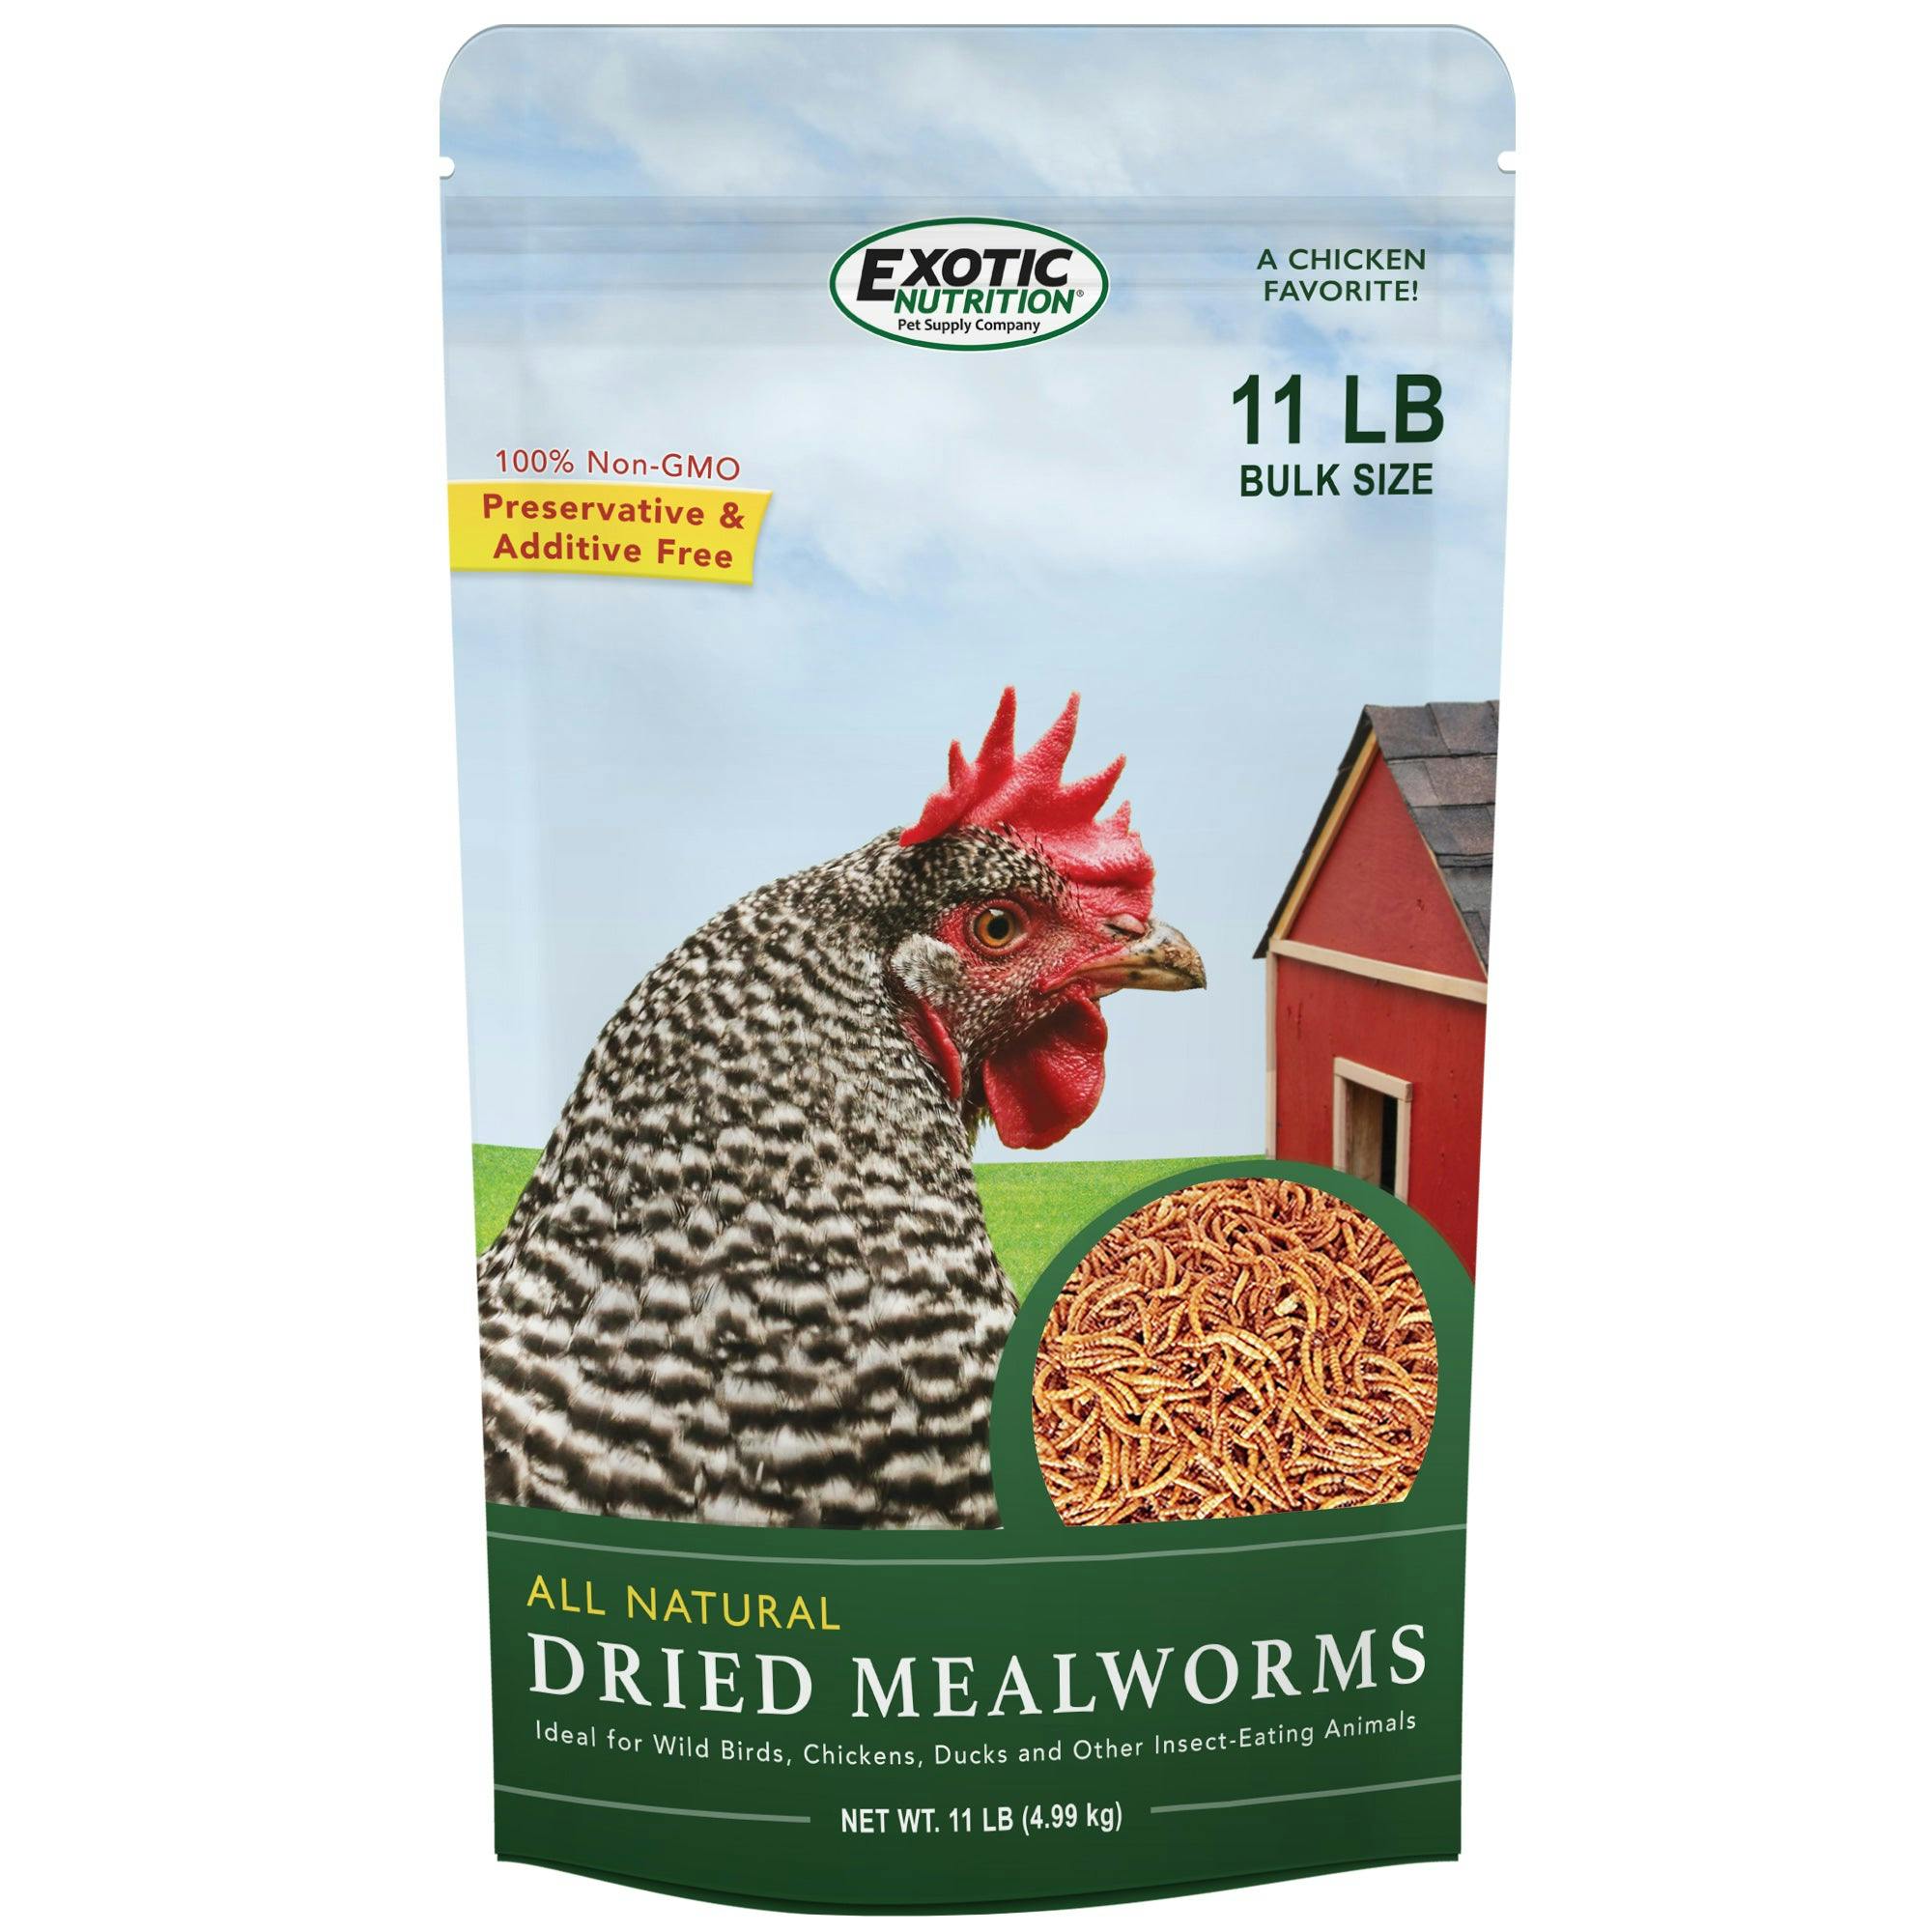 Dried Mealworms Bulk - Image 0